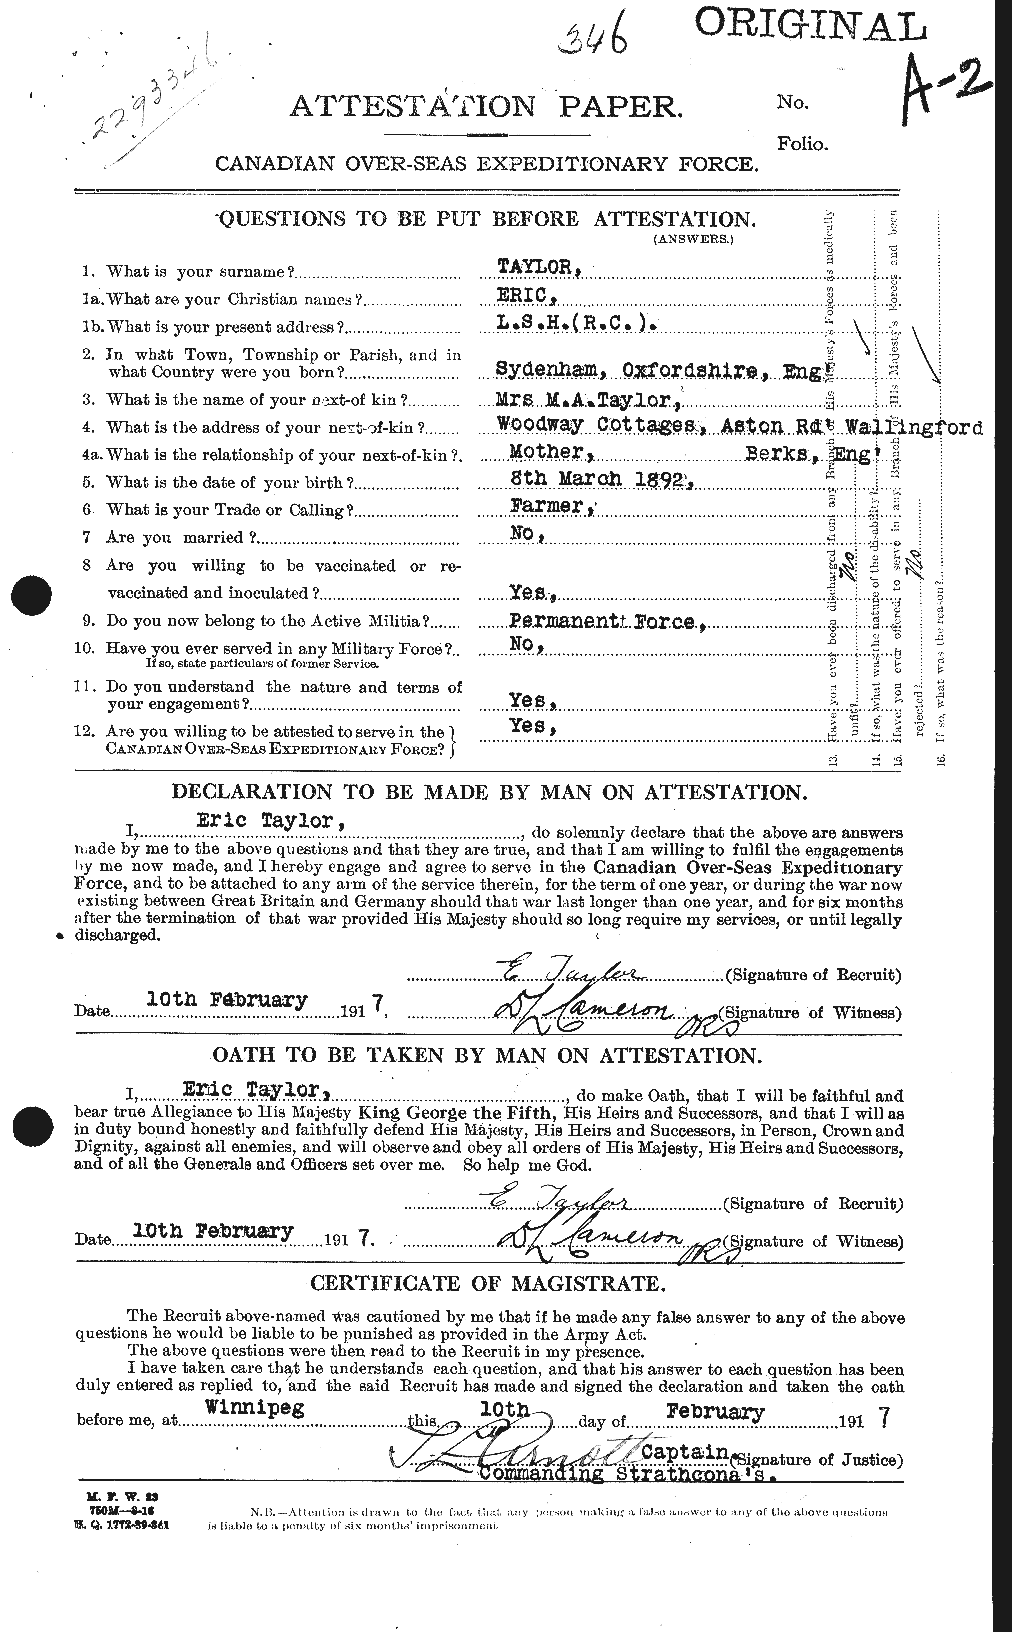 Personnel Records of the First World War - CEF 627360a